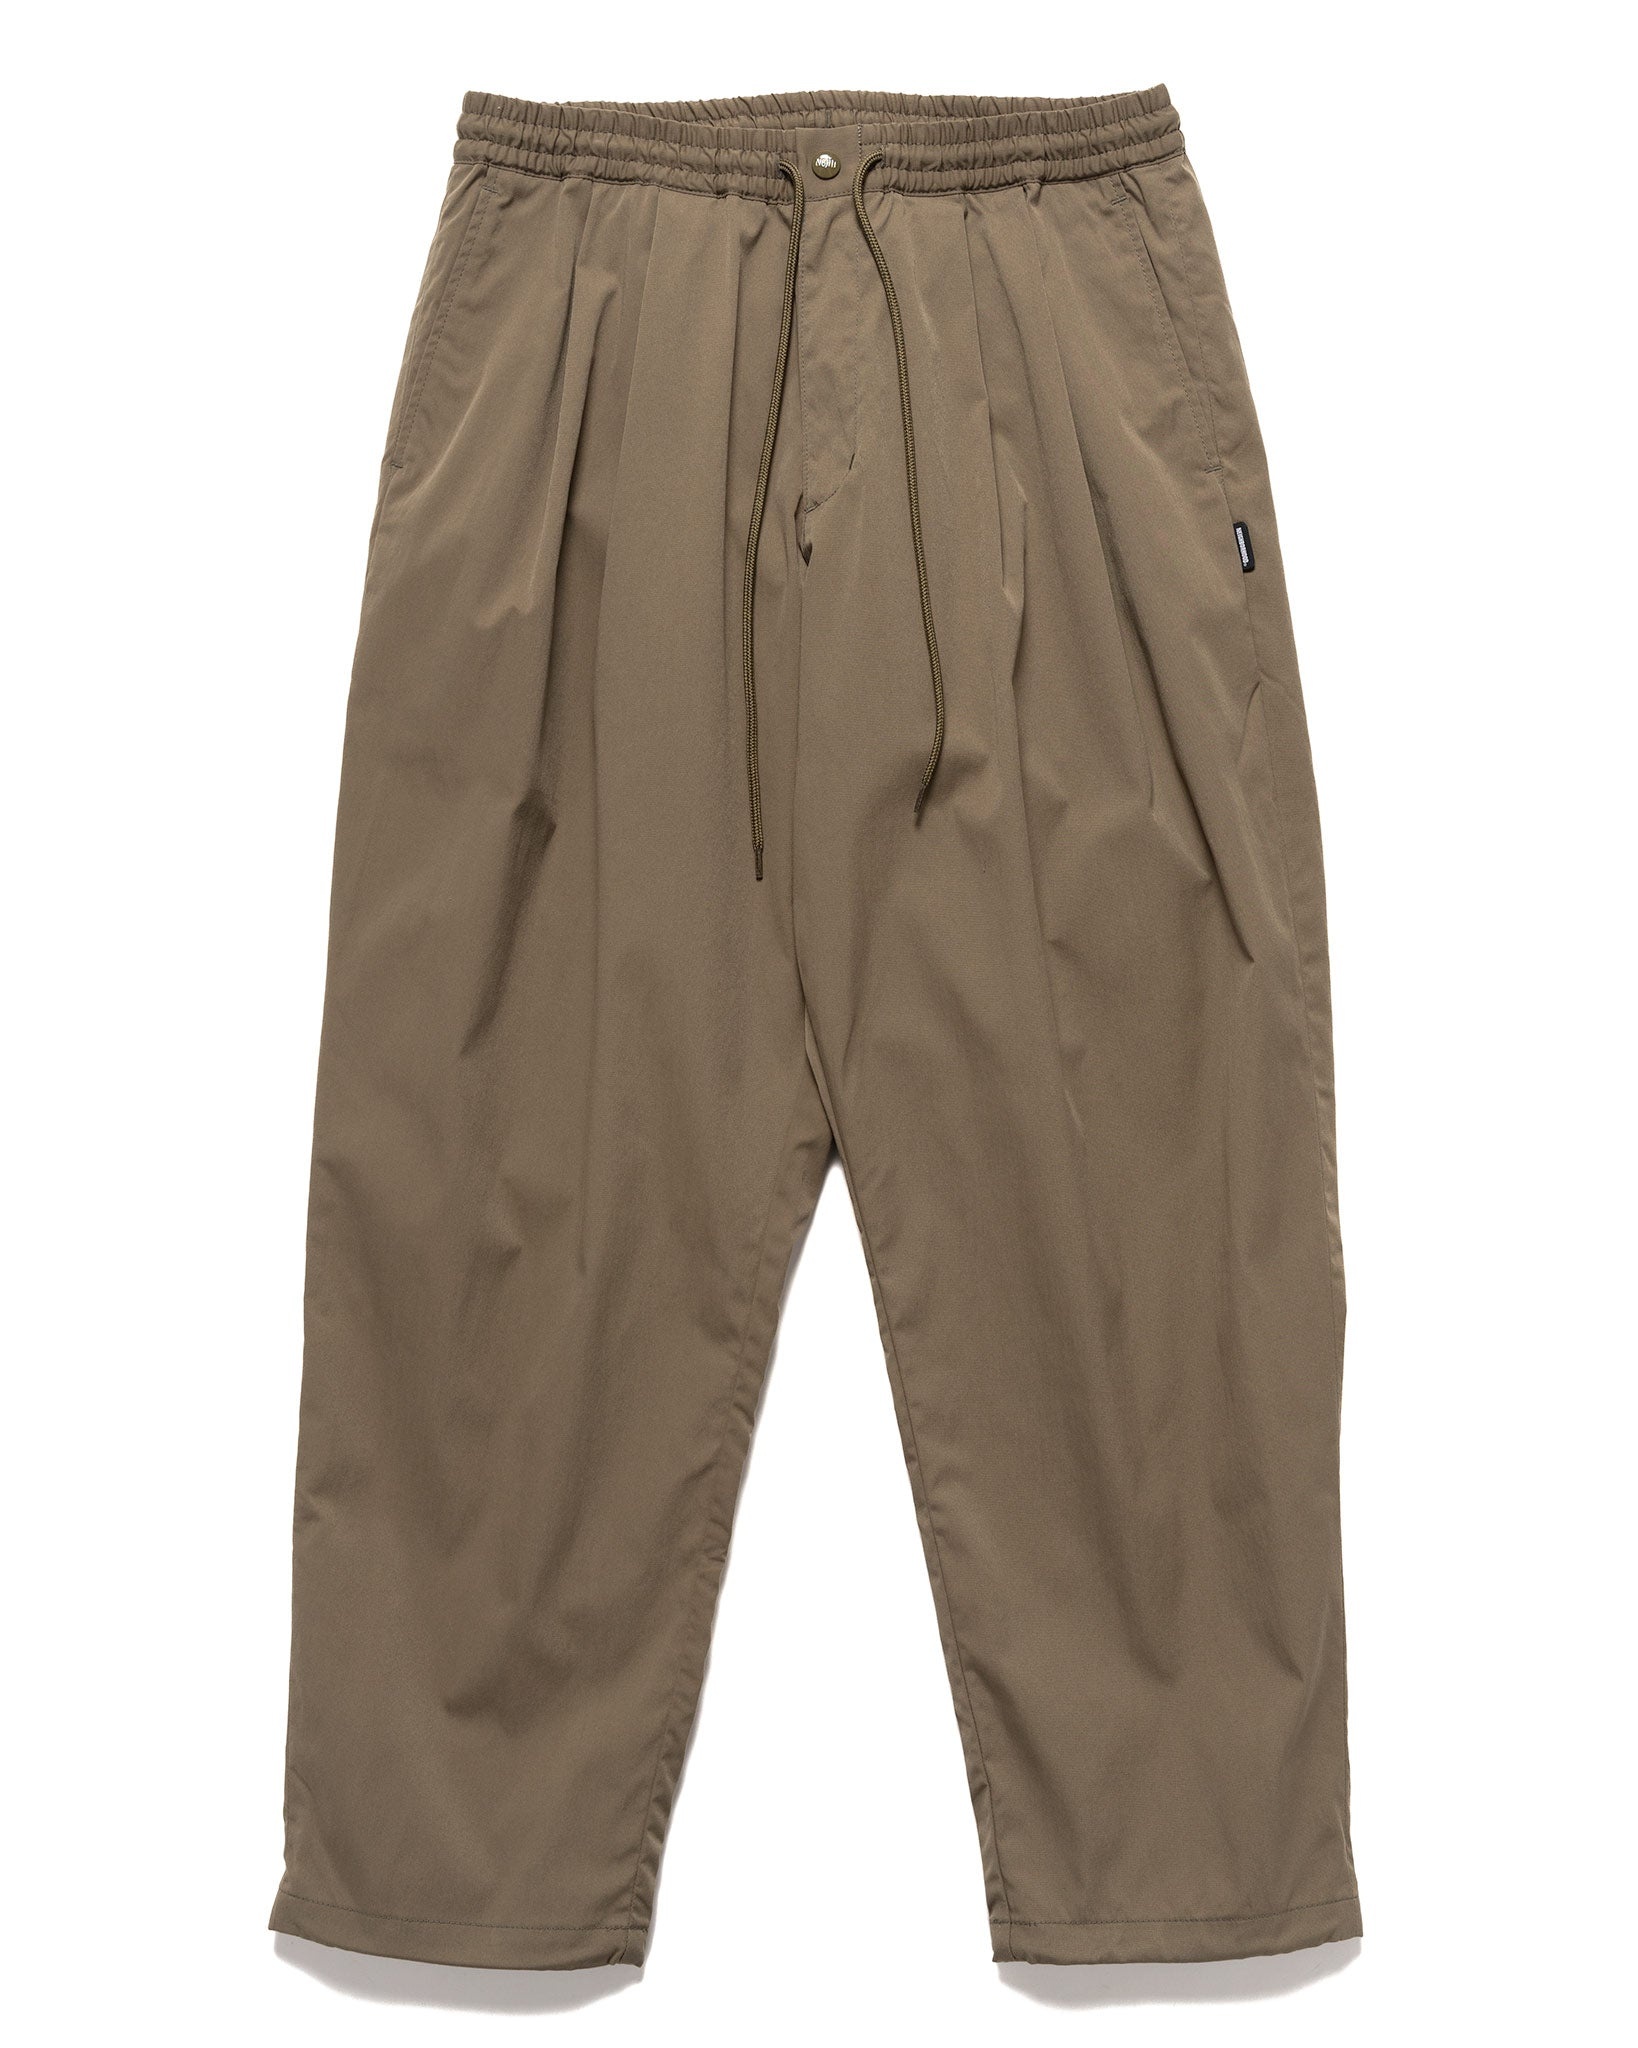 Baggysilhouette Easy Pants Olive Drab - 1